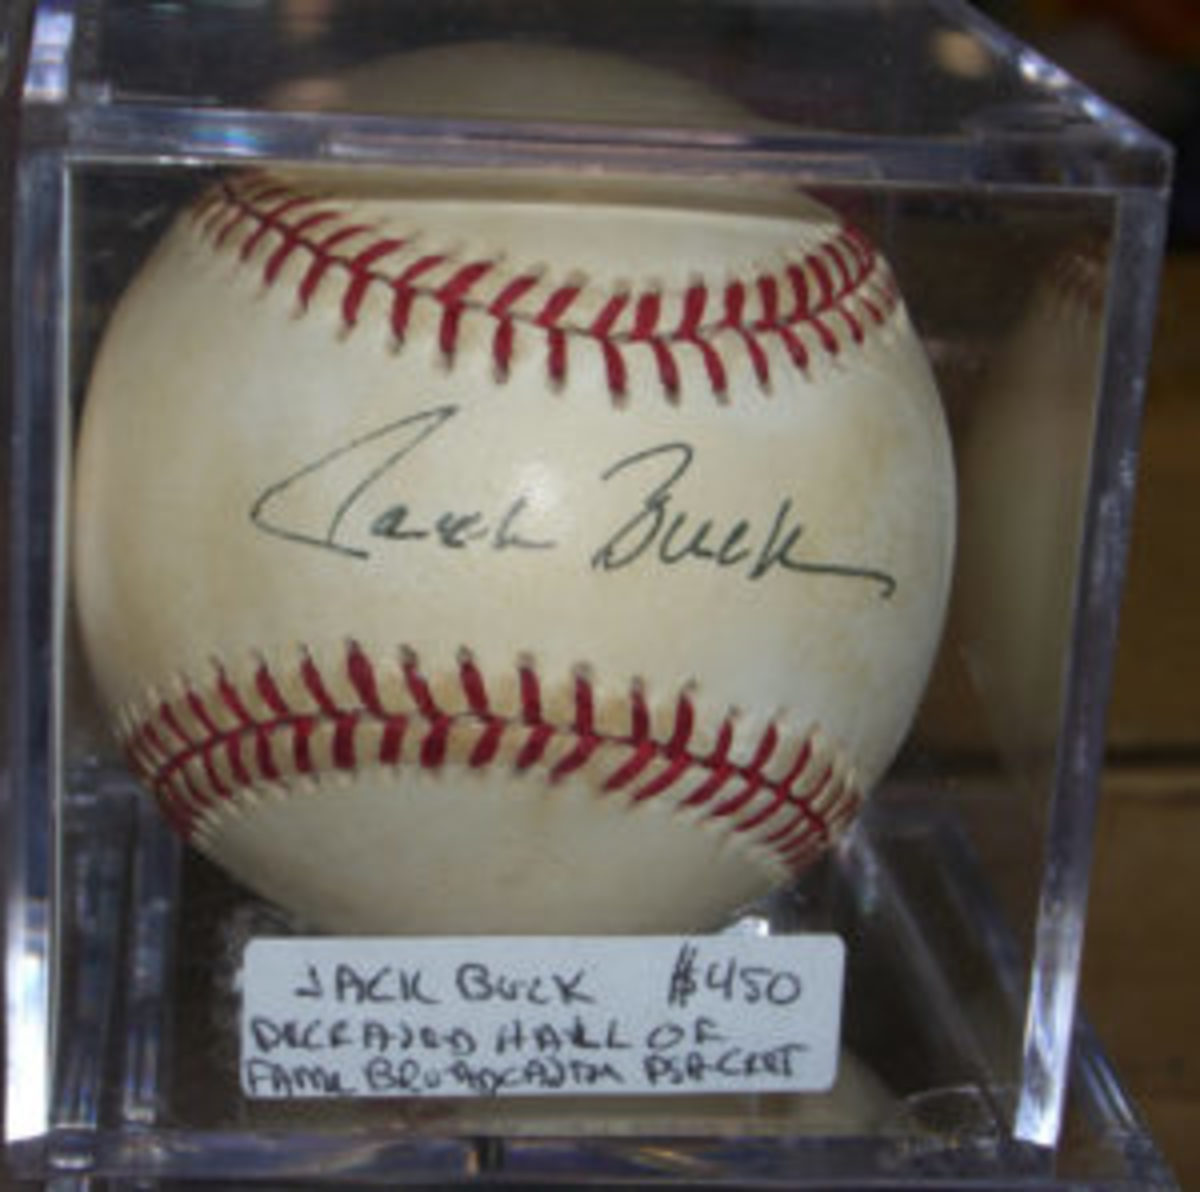  Collectors looking for a Jack Buck autographed baseball had to dish out $450. (Ross Forman photo)